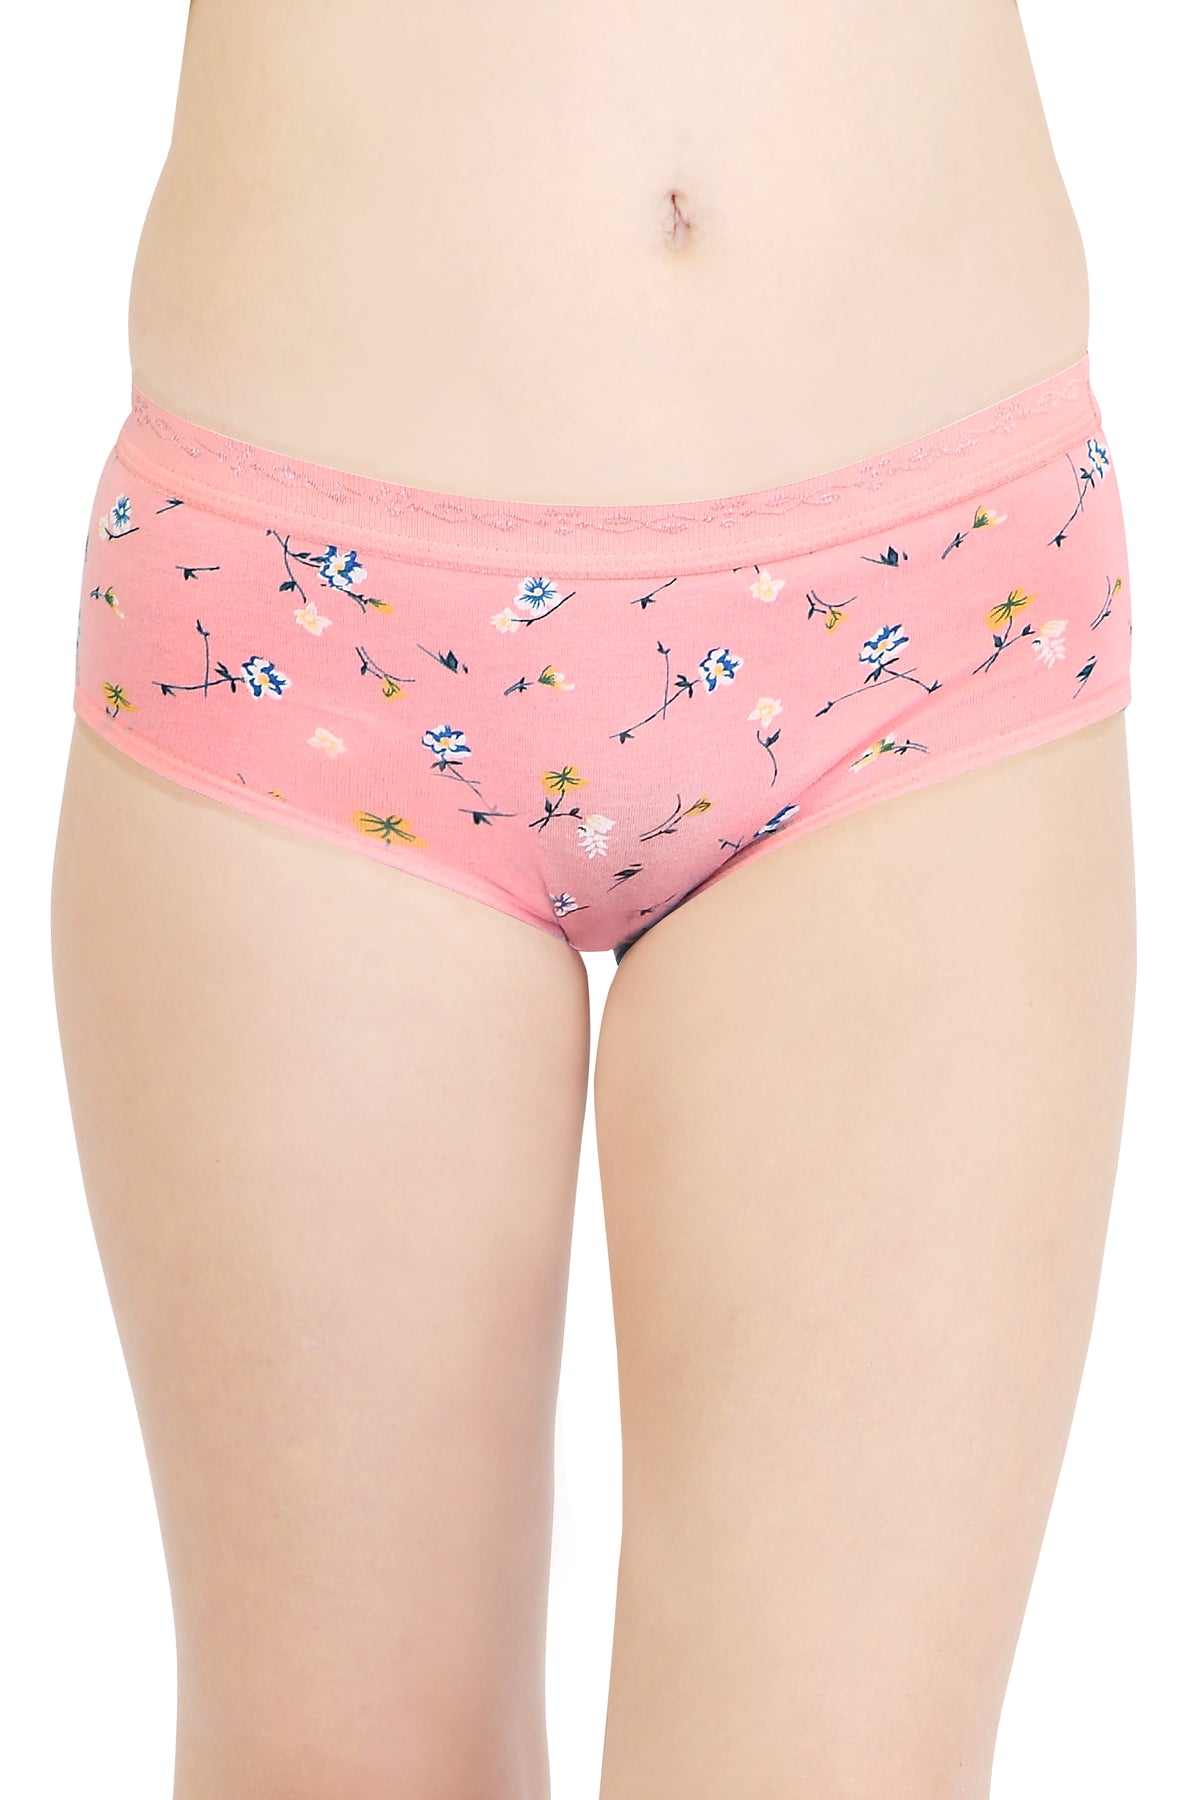 Teen Age/ Kids Girl Printed Cotton Comfortable Mid-Waist Hipster Panty with Stretchable Soft Elastic